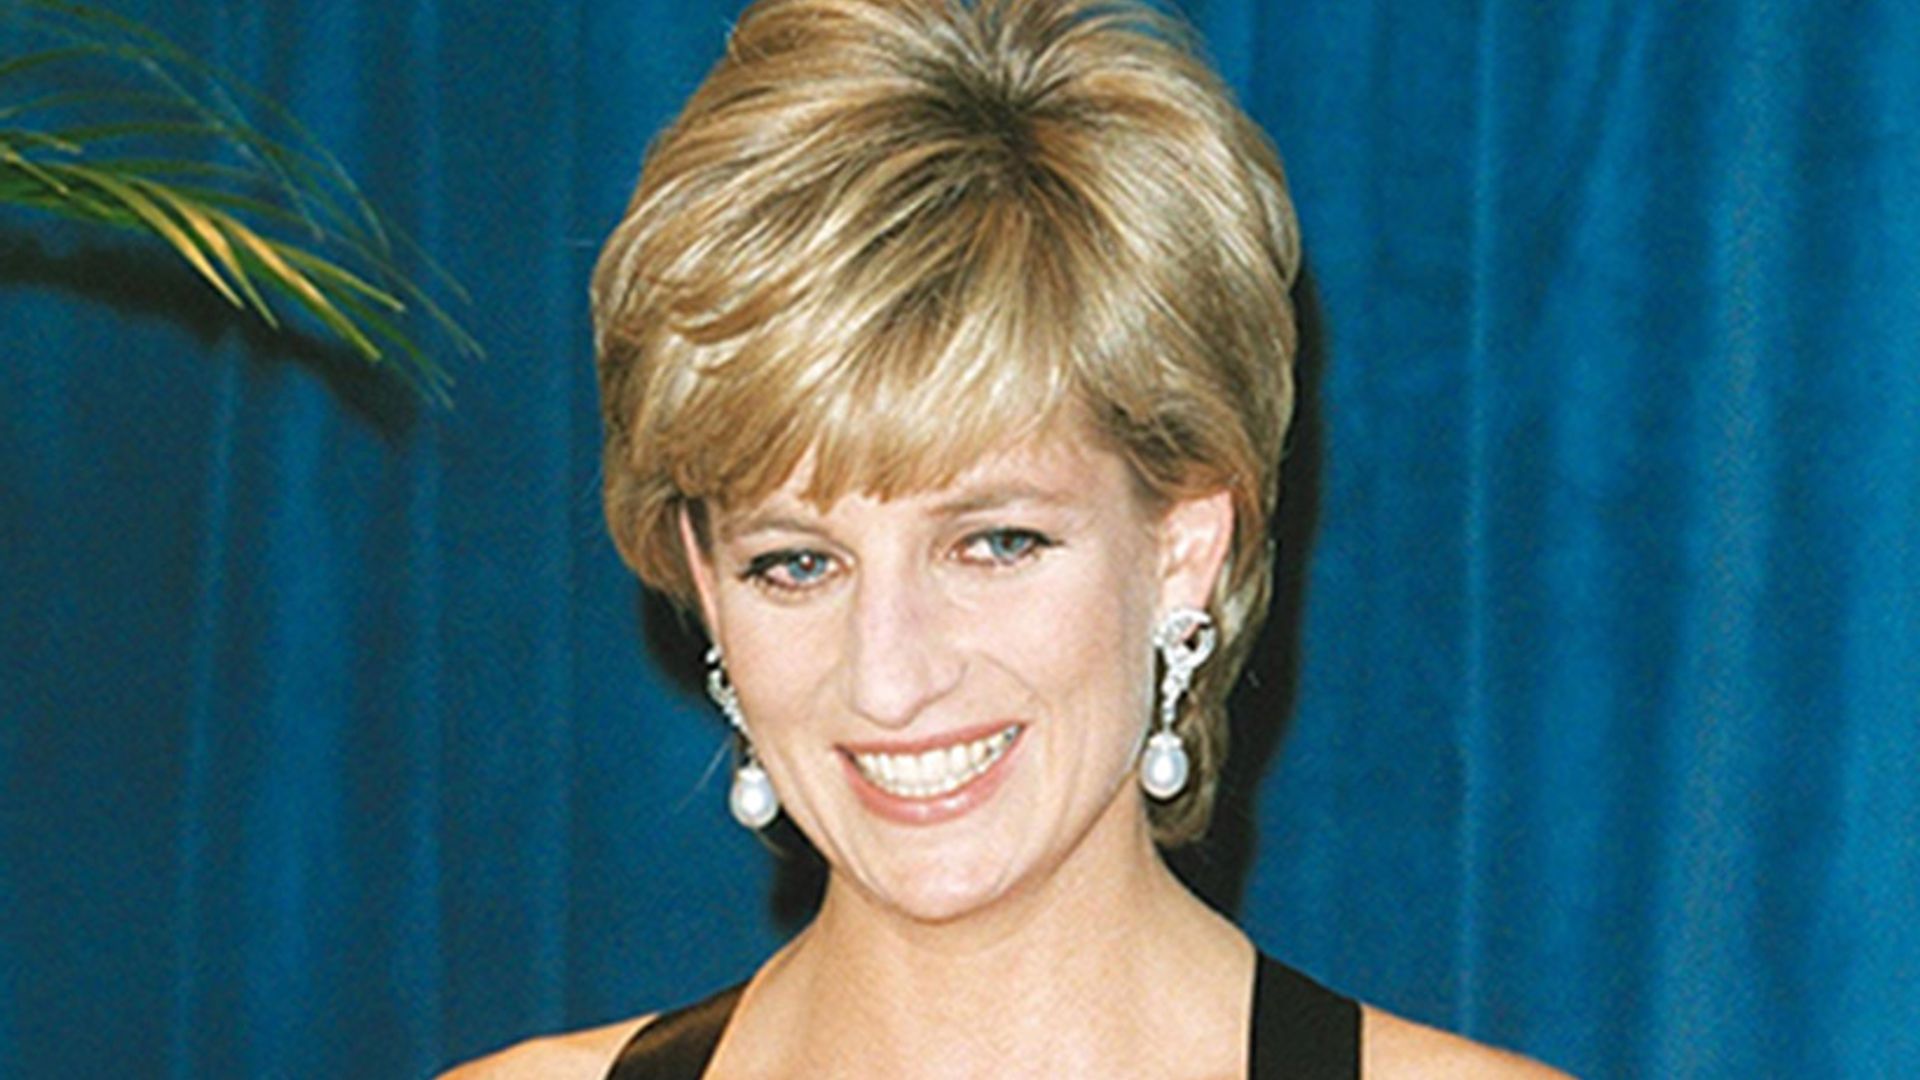 Earl Spencer pays tribute to Princess Diana in new documentary